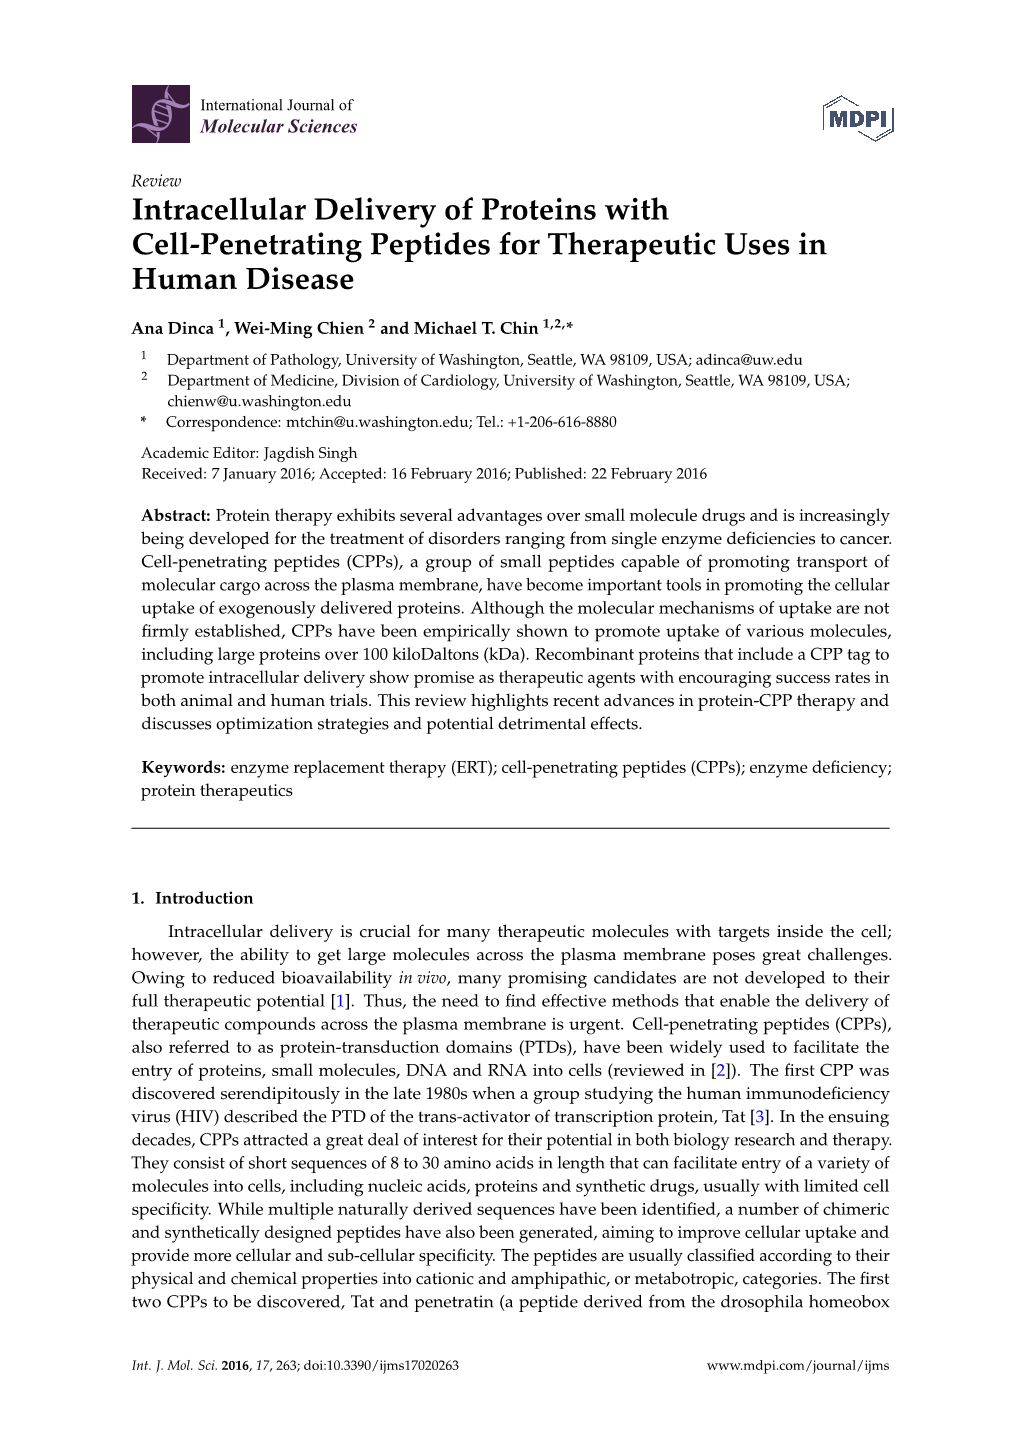 Intracellular Delivery of Proteins with Cell-Penetrating Peptides for Therapeutic Uses in Human Disease